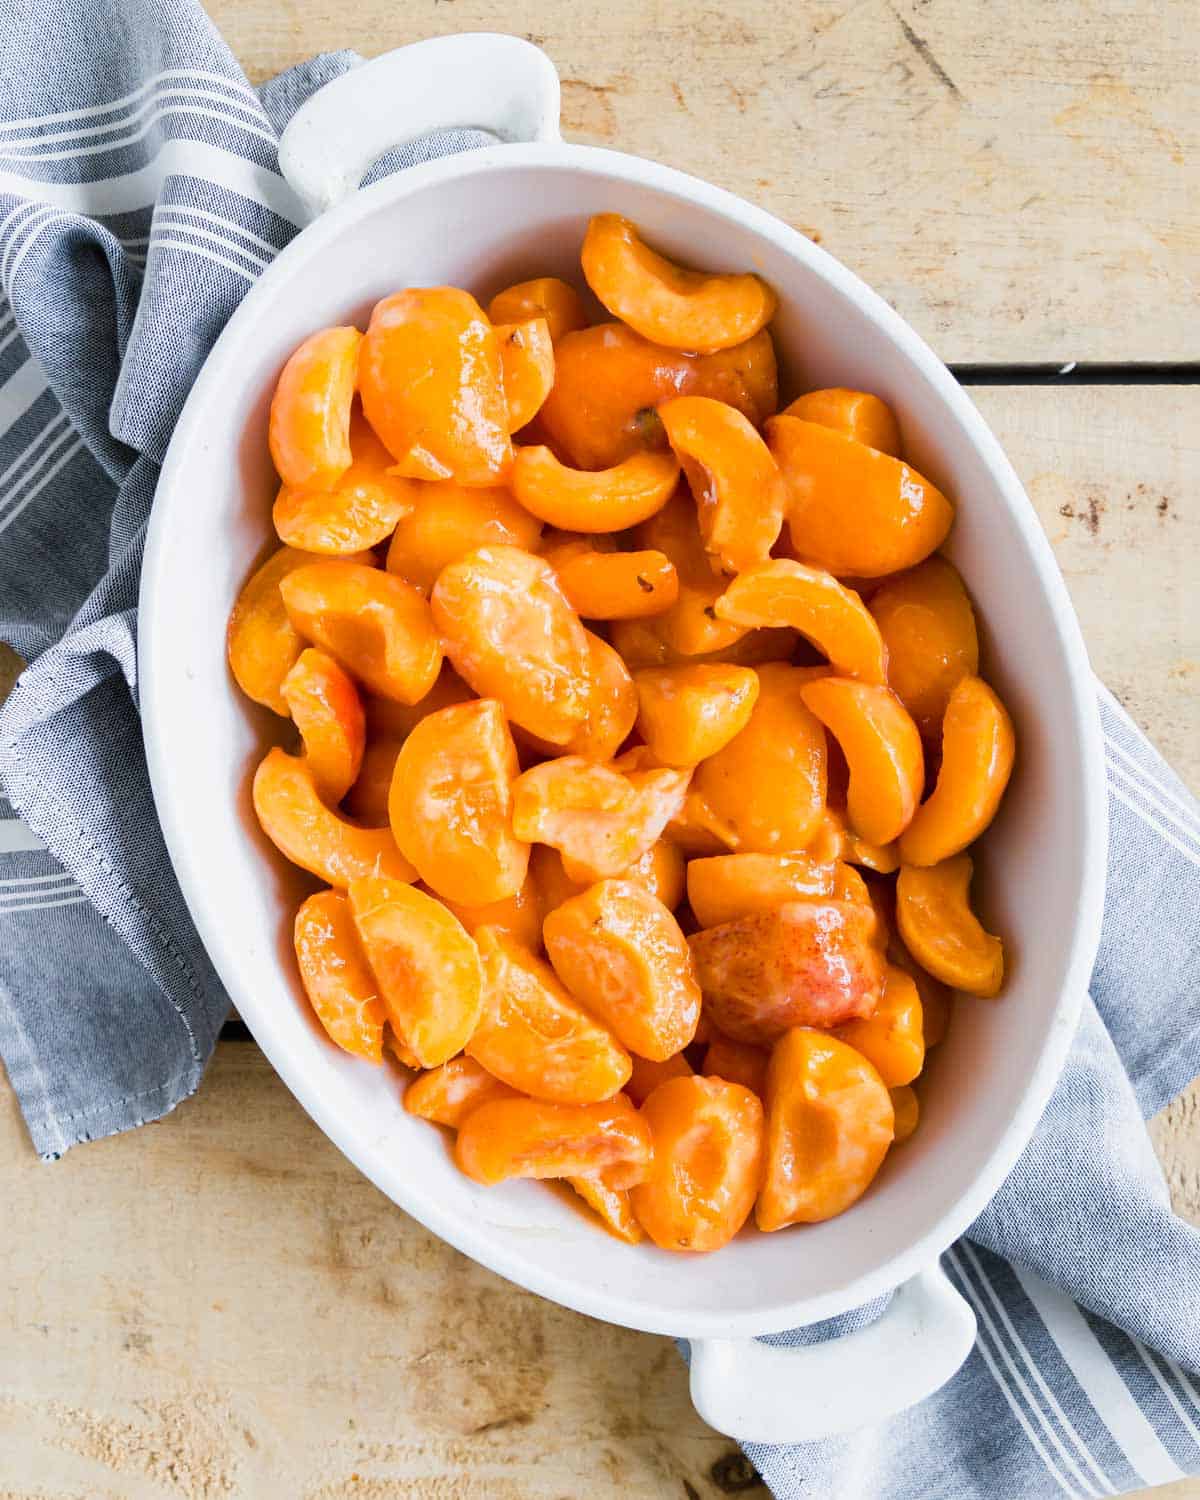 Apricots in a white baking dish with a gray and white striped linen beneath.